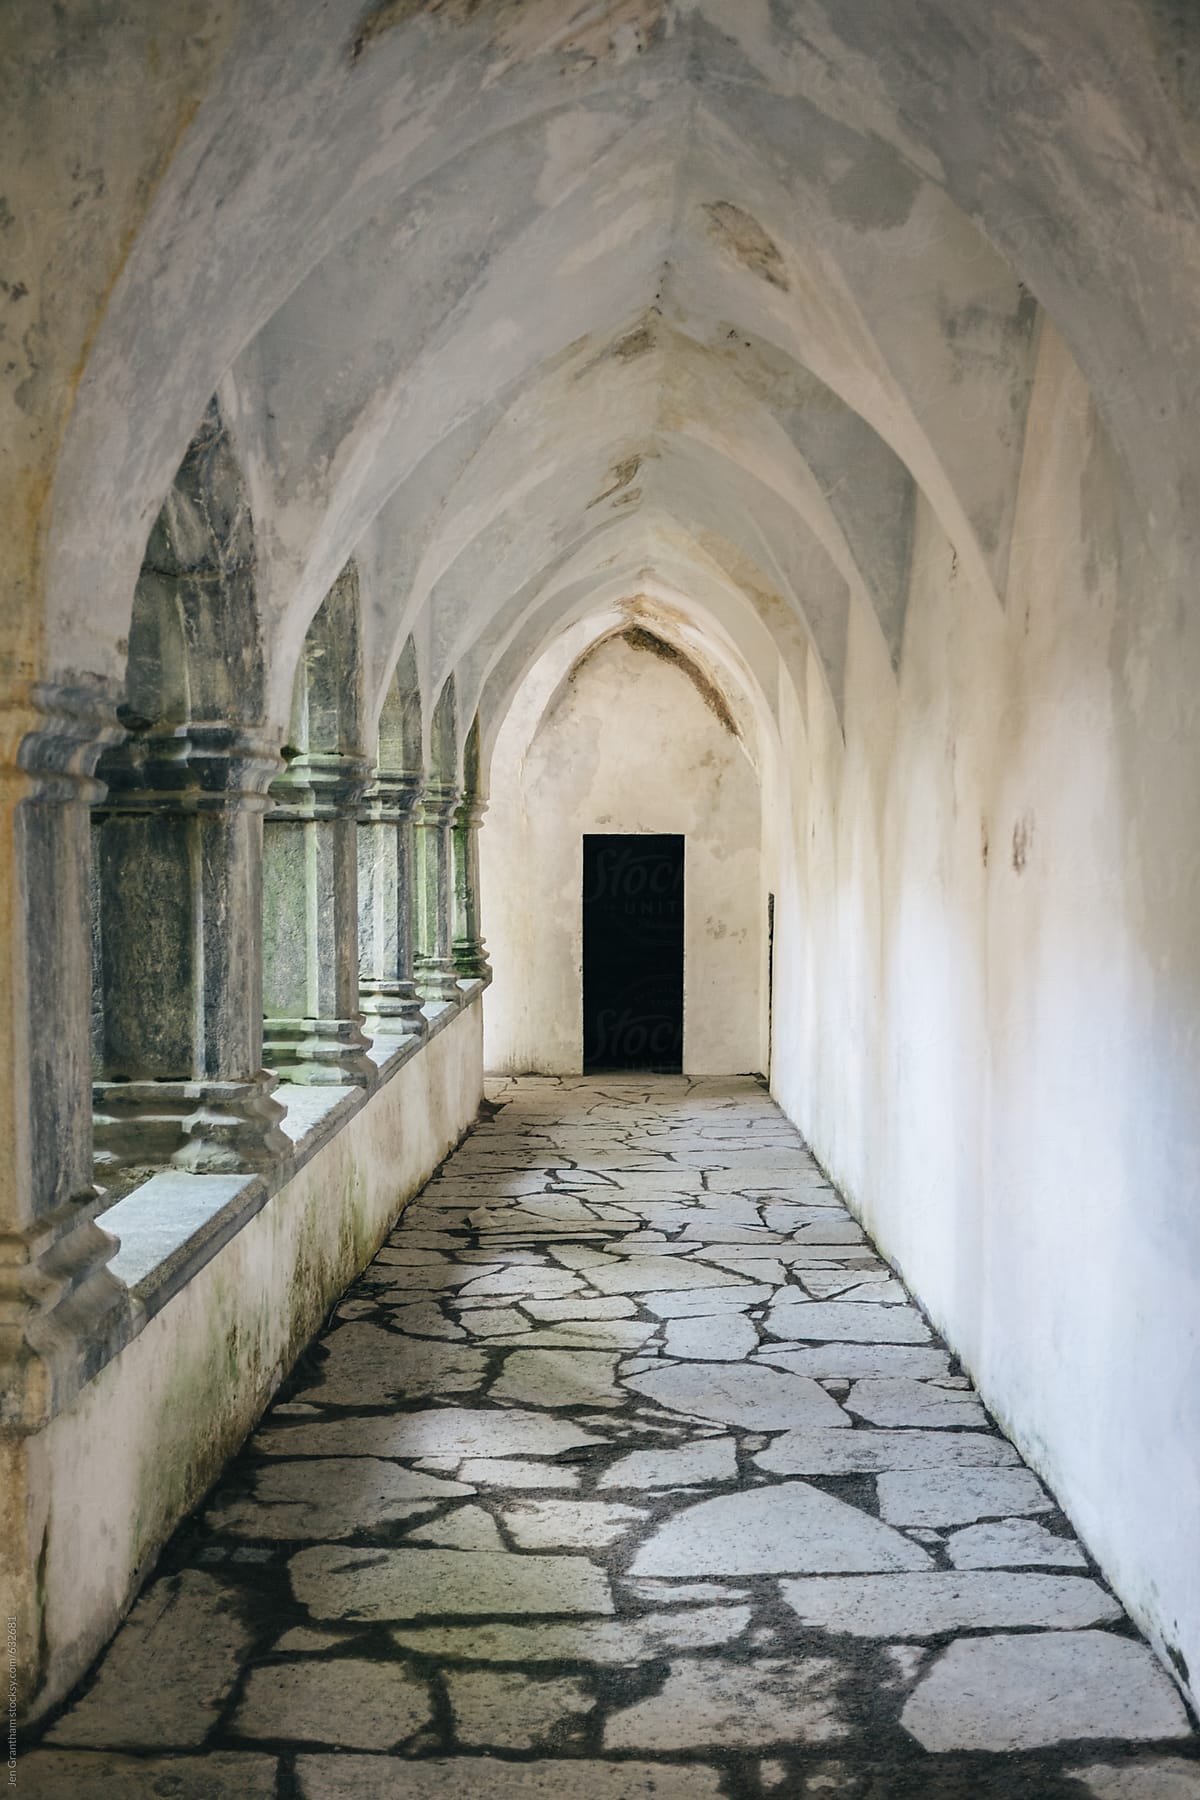 A hallway in the ruins of Muckross Abbey